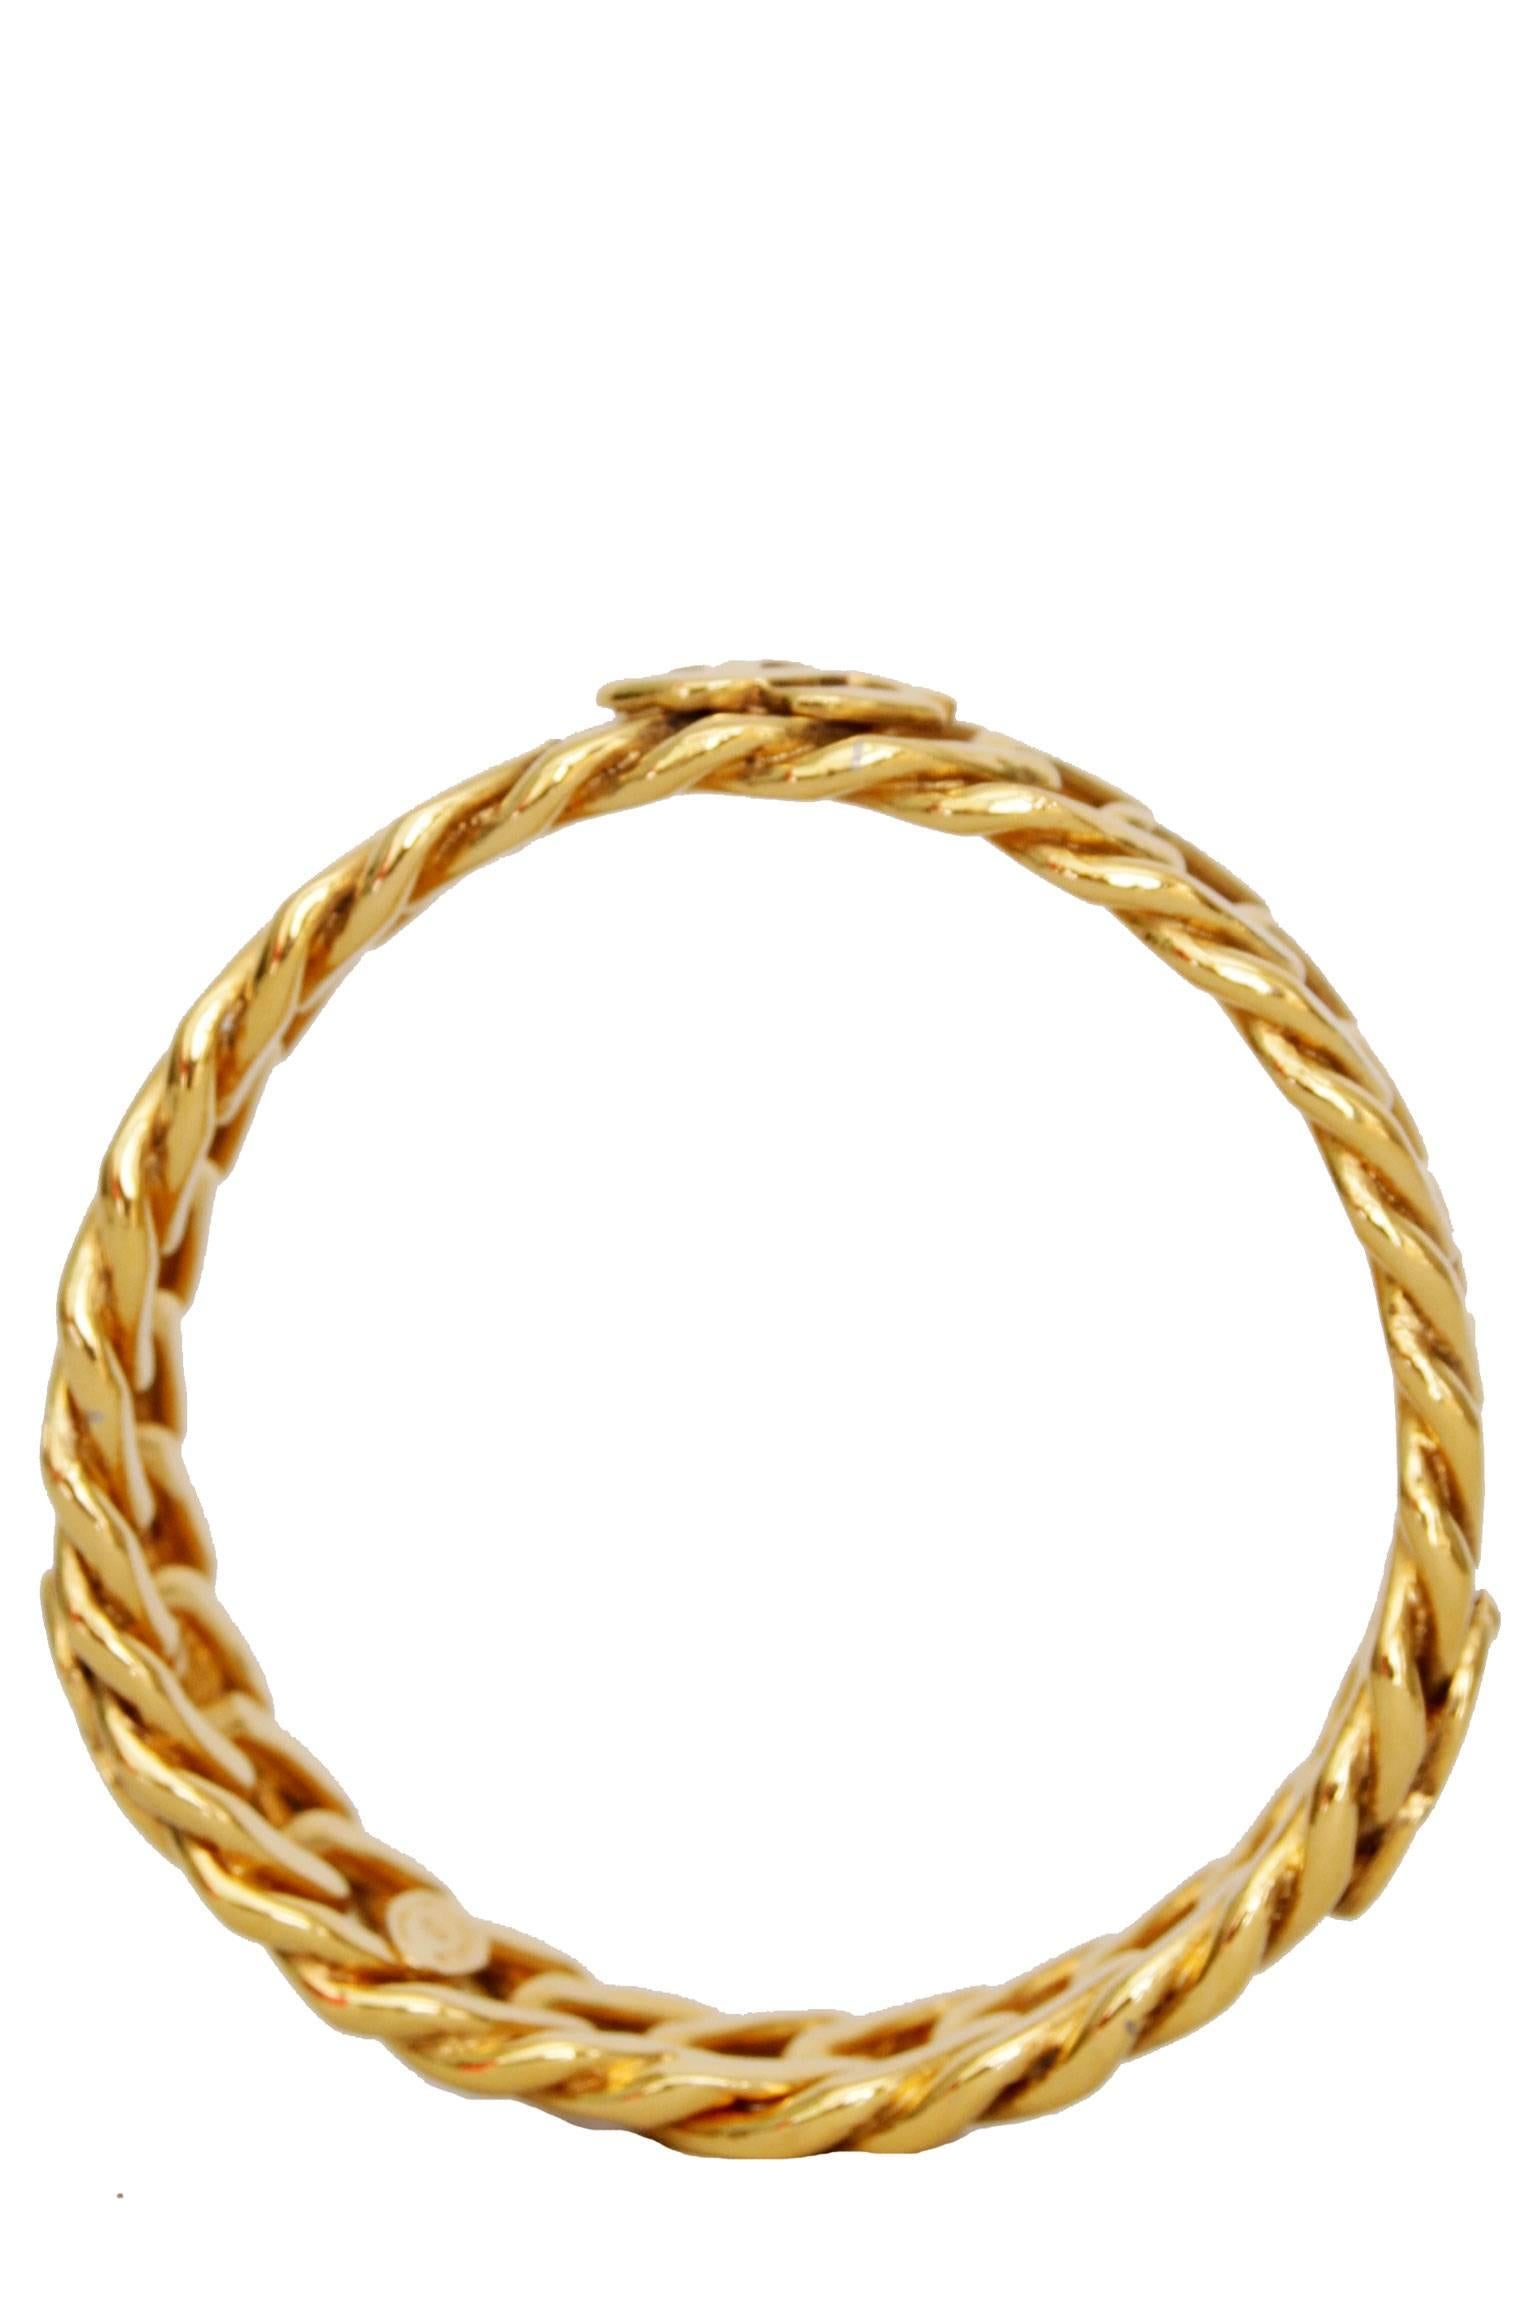 A stunning 1980s Chanel gold-toned chain bracelet with three double-C logos on the side. 

The logos measure 1.8x1.5 cm 

The bracelet is stamped: 